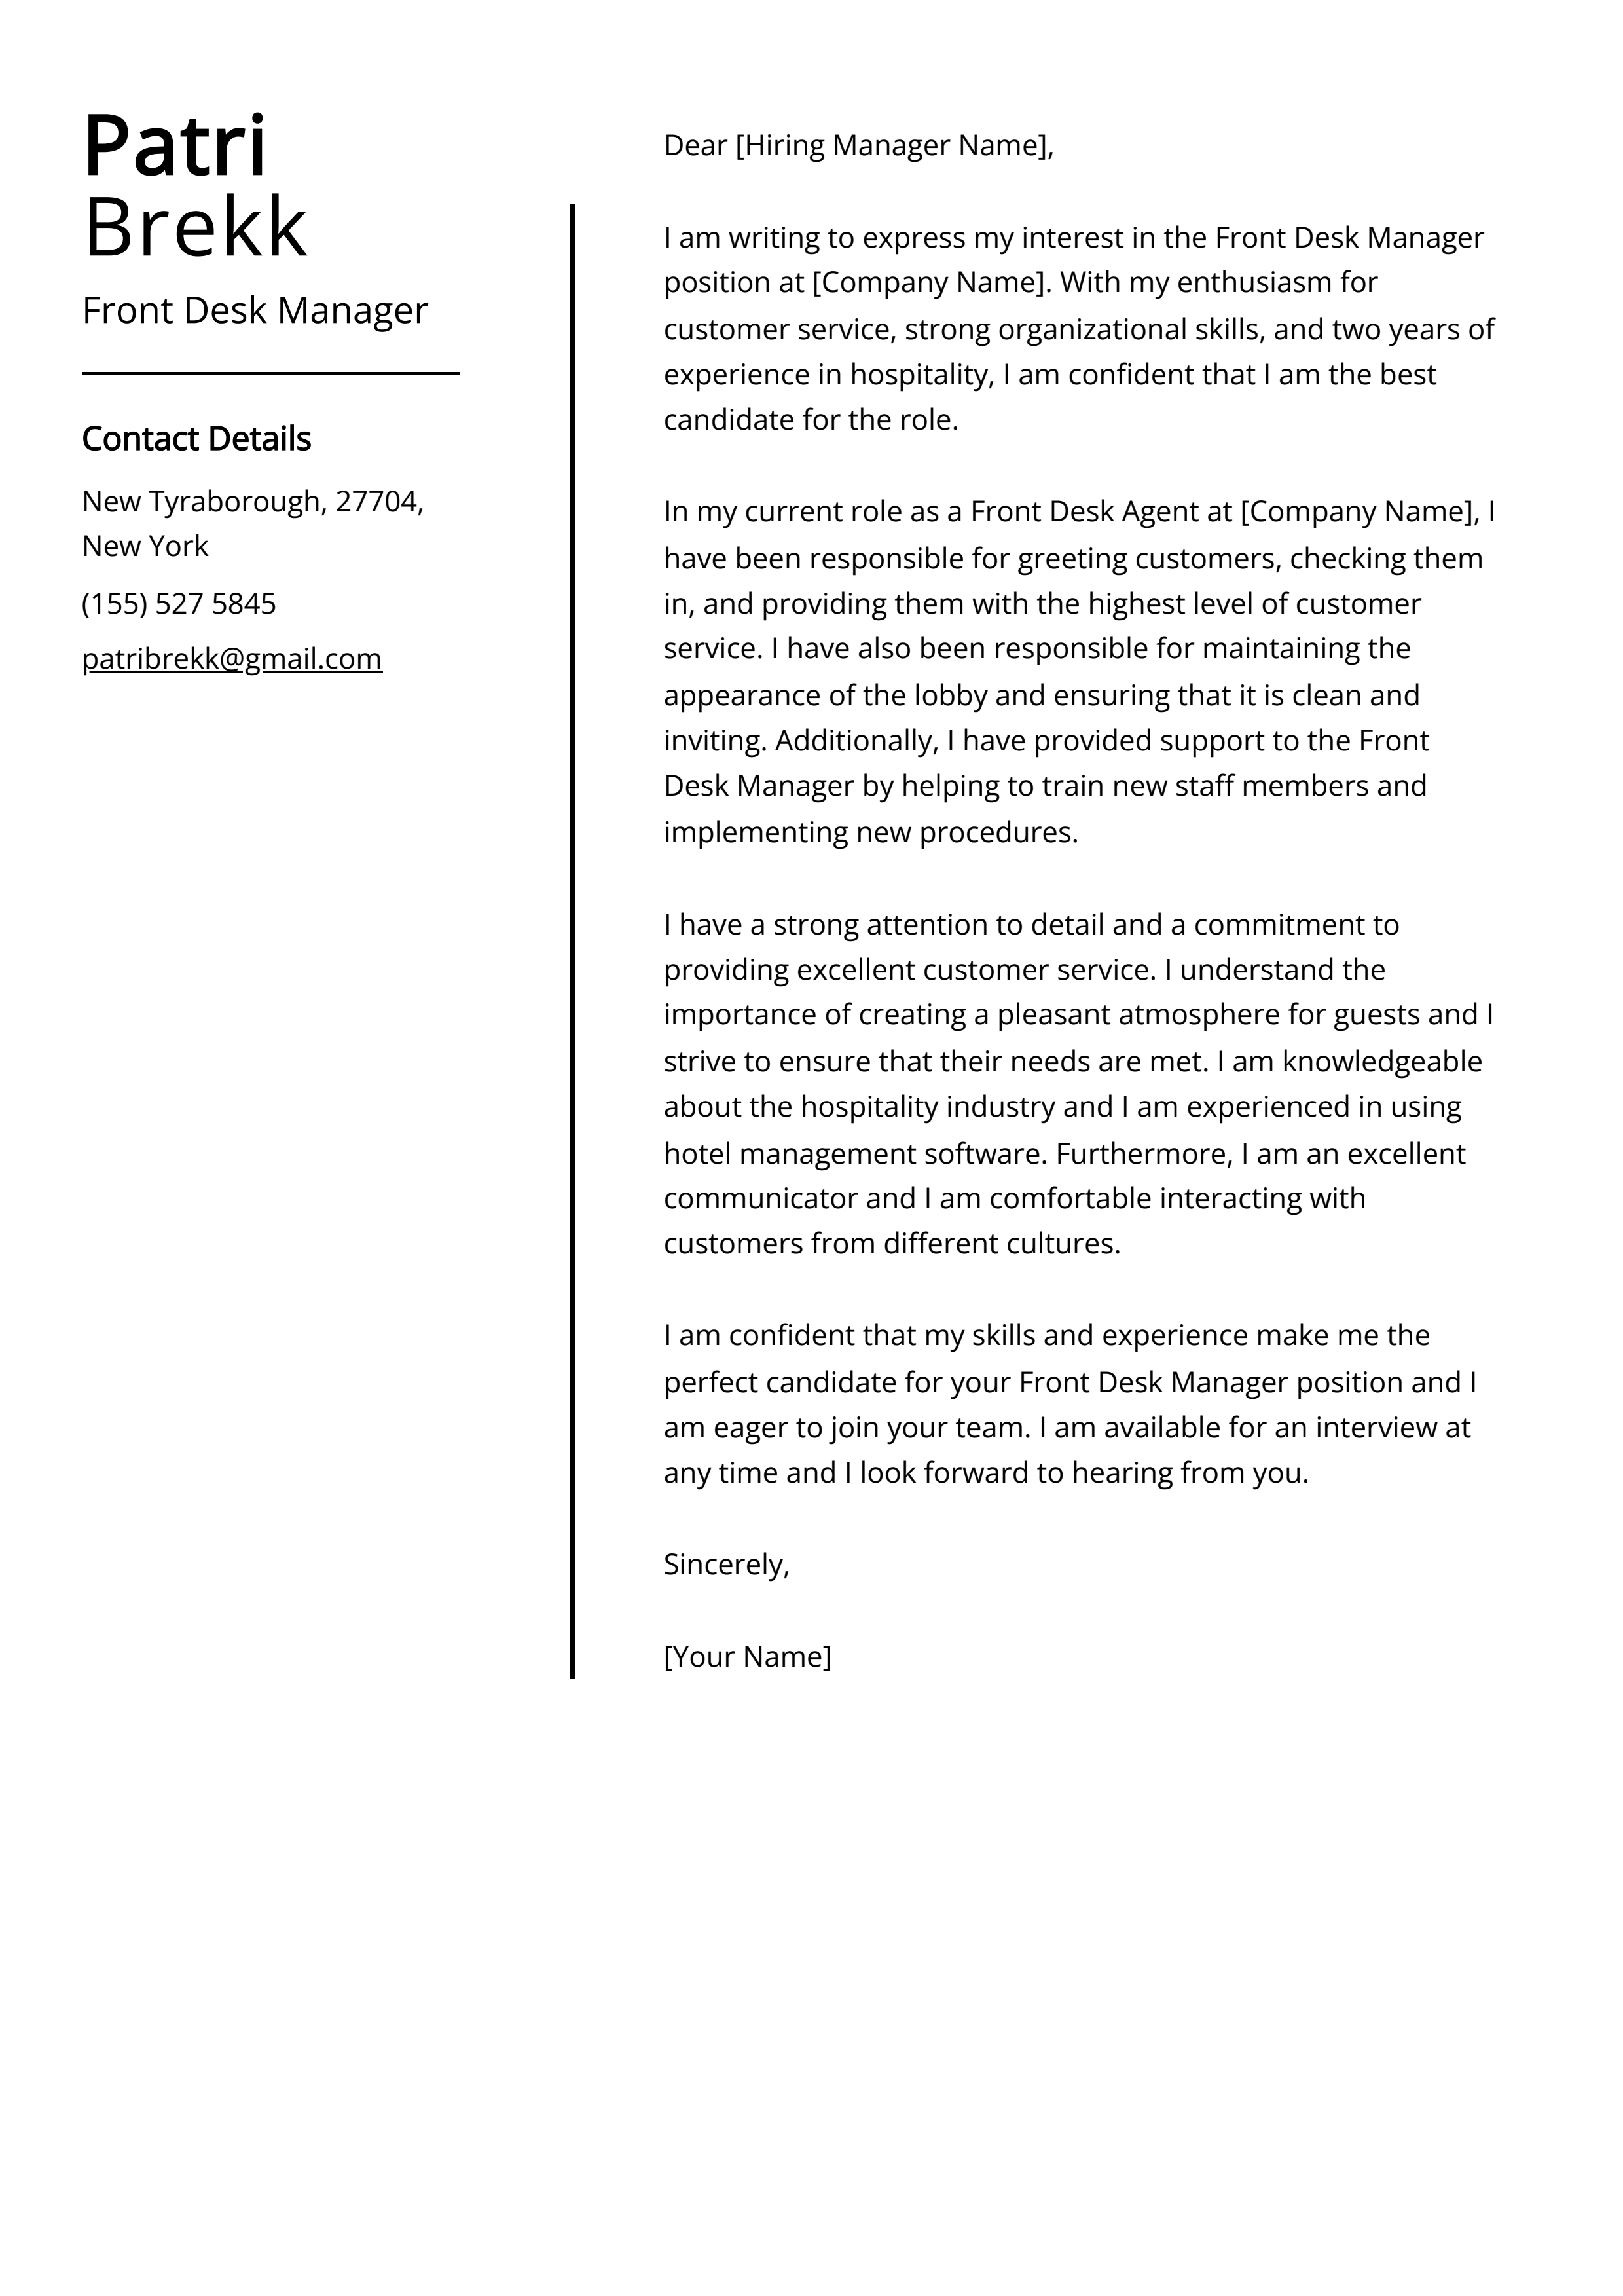 Front Desk Manager Cover Letter Example